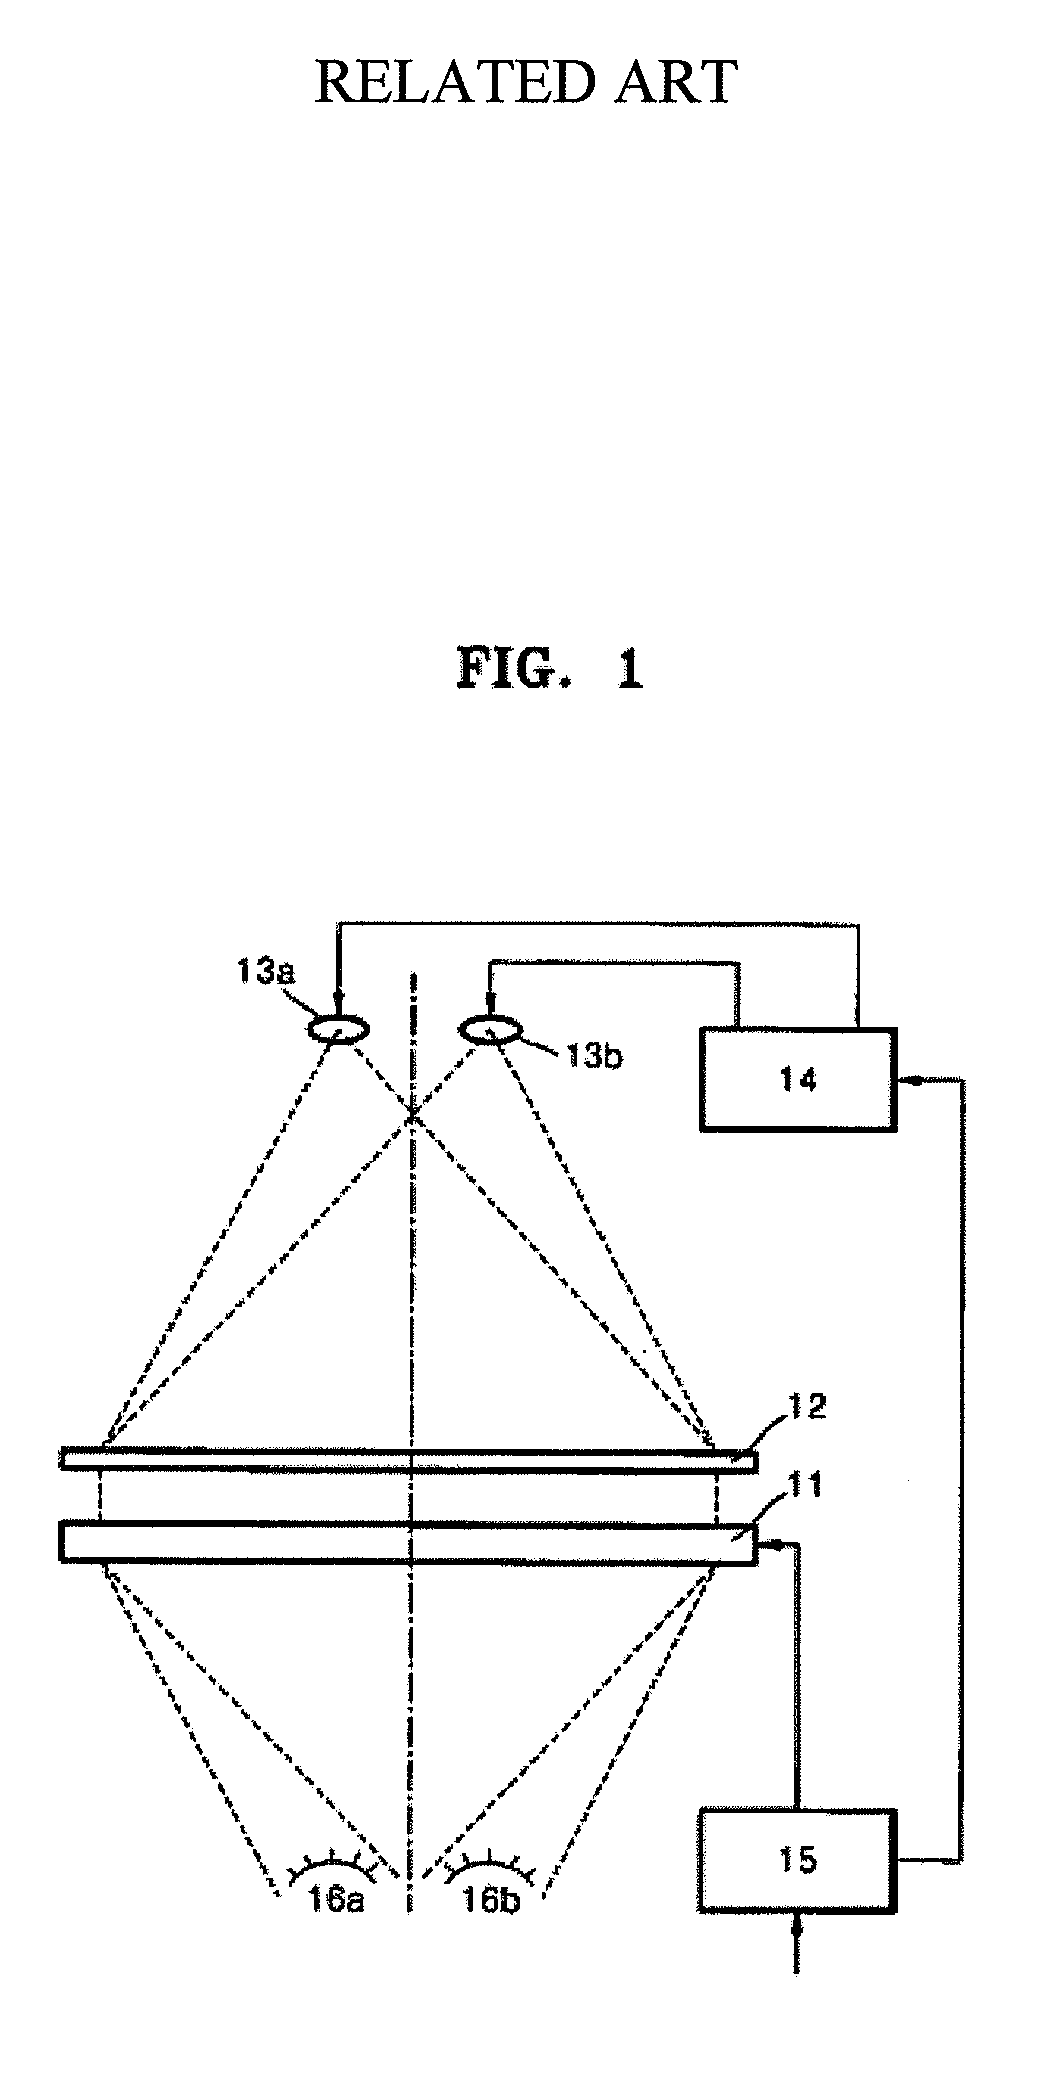 High-resolution autostereoscopic display